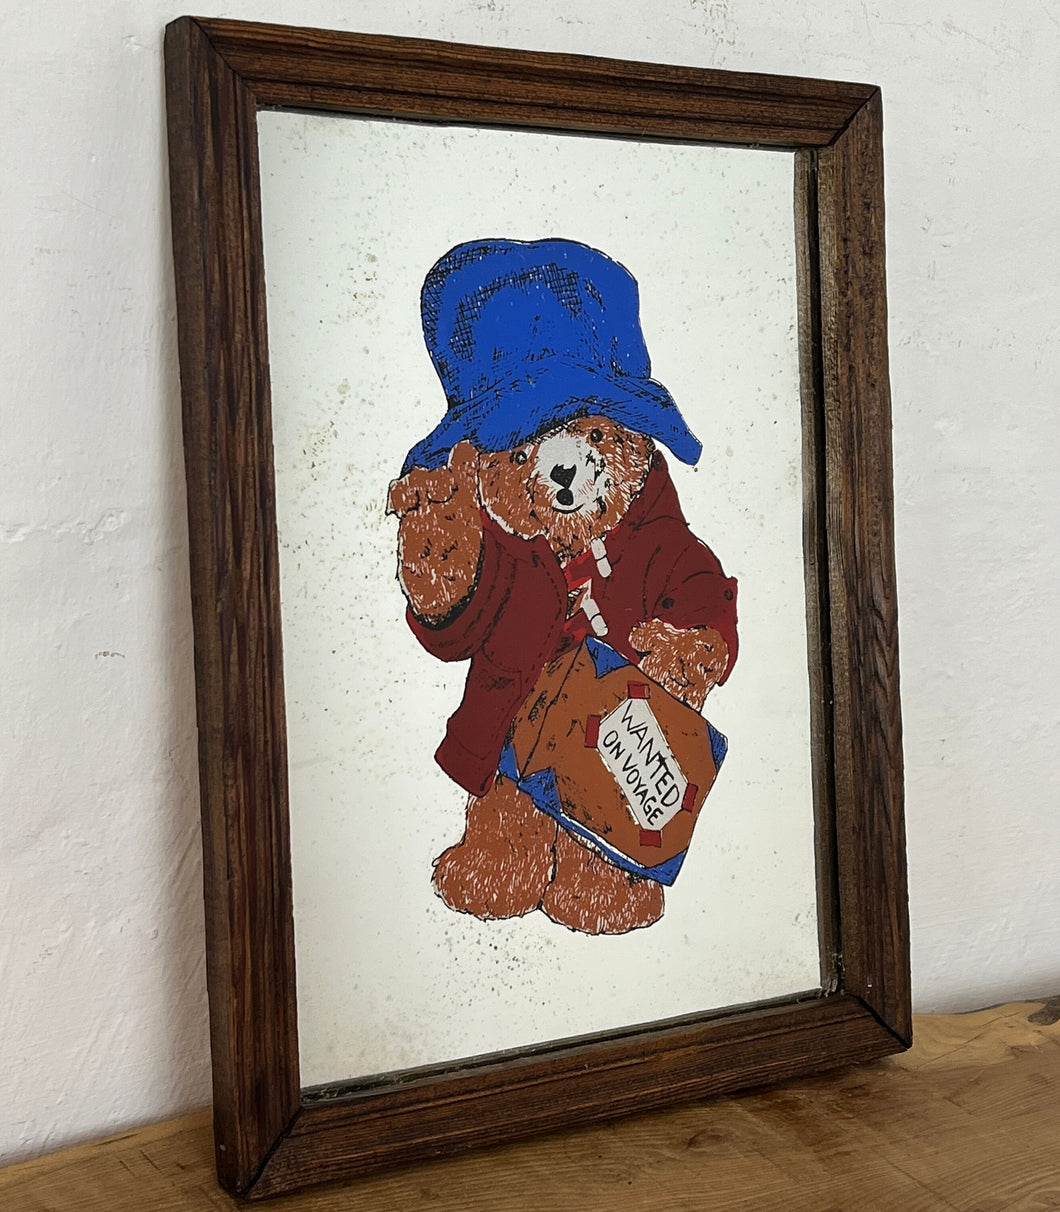 Fantastic Paddington design with bold wording towards the top with a superb picture of the bear with his iconic suitcase, raincoat and hat with nice aged matt colours with wanted on voyage written on his suitcase